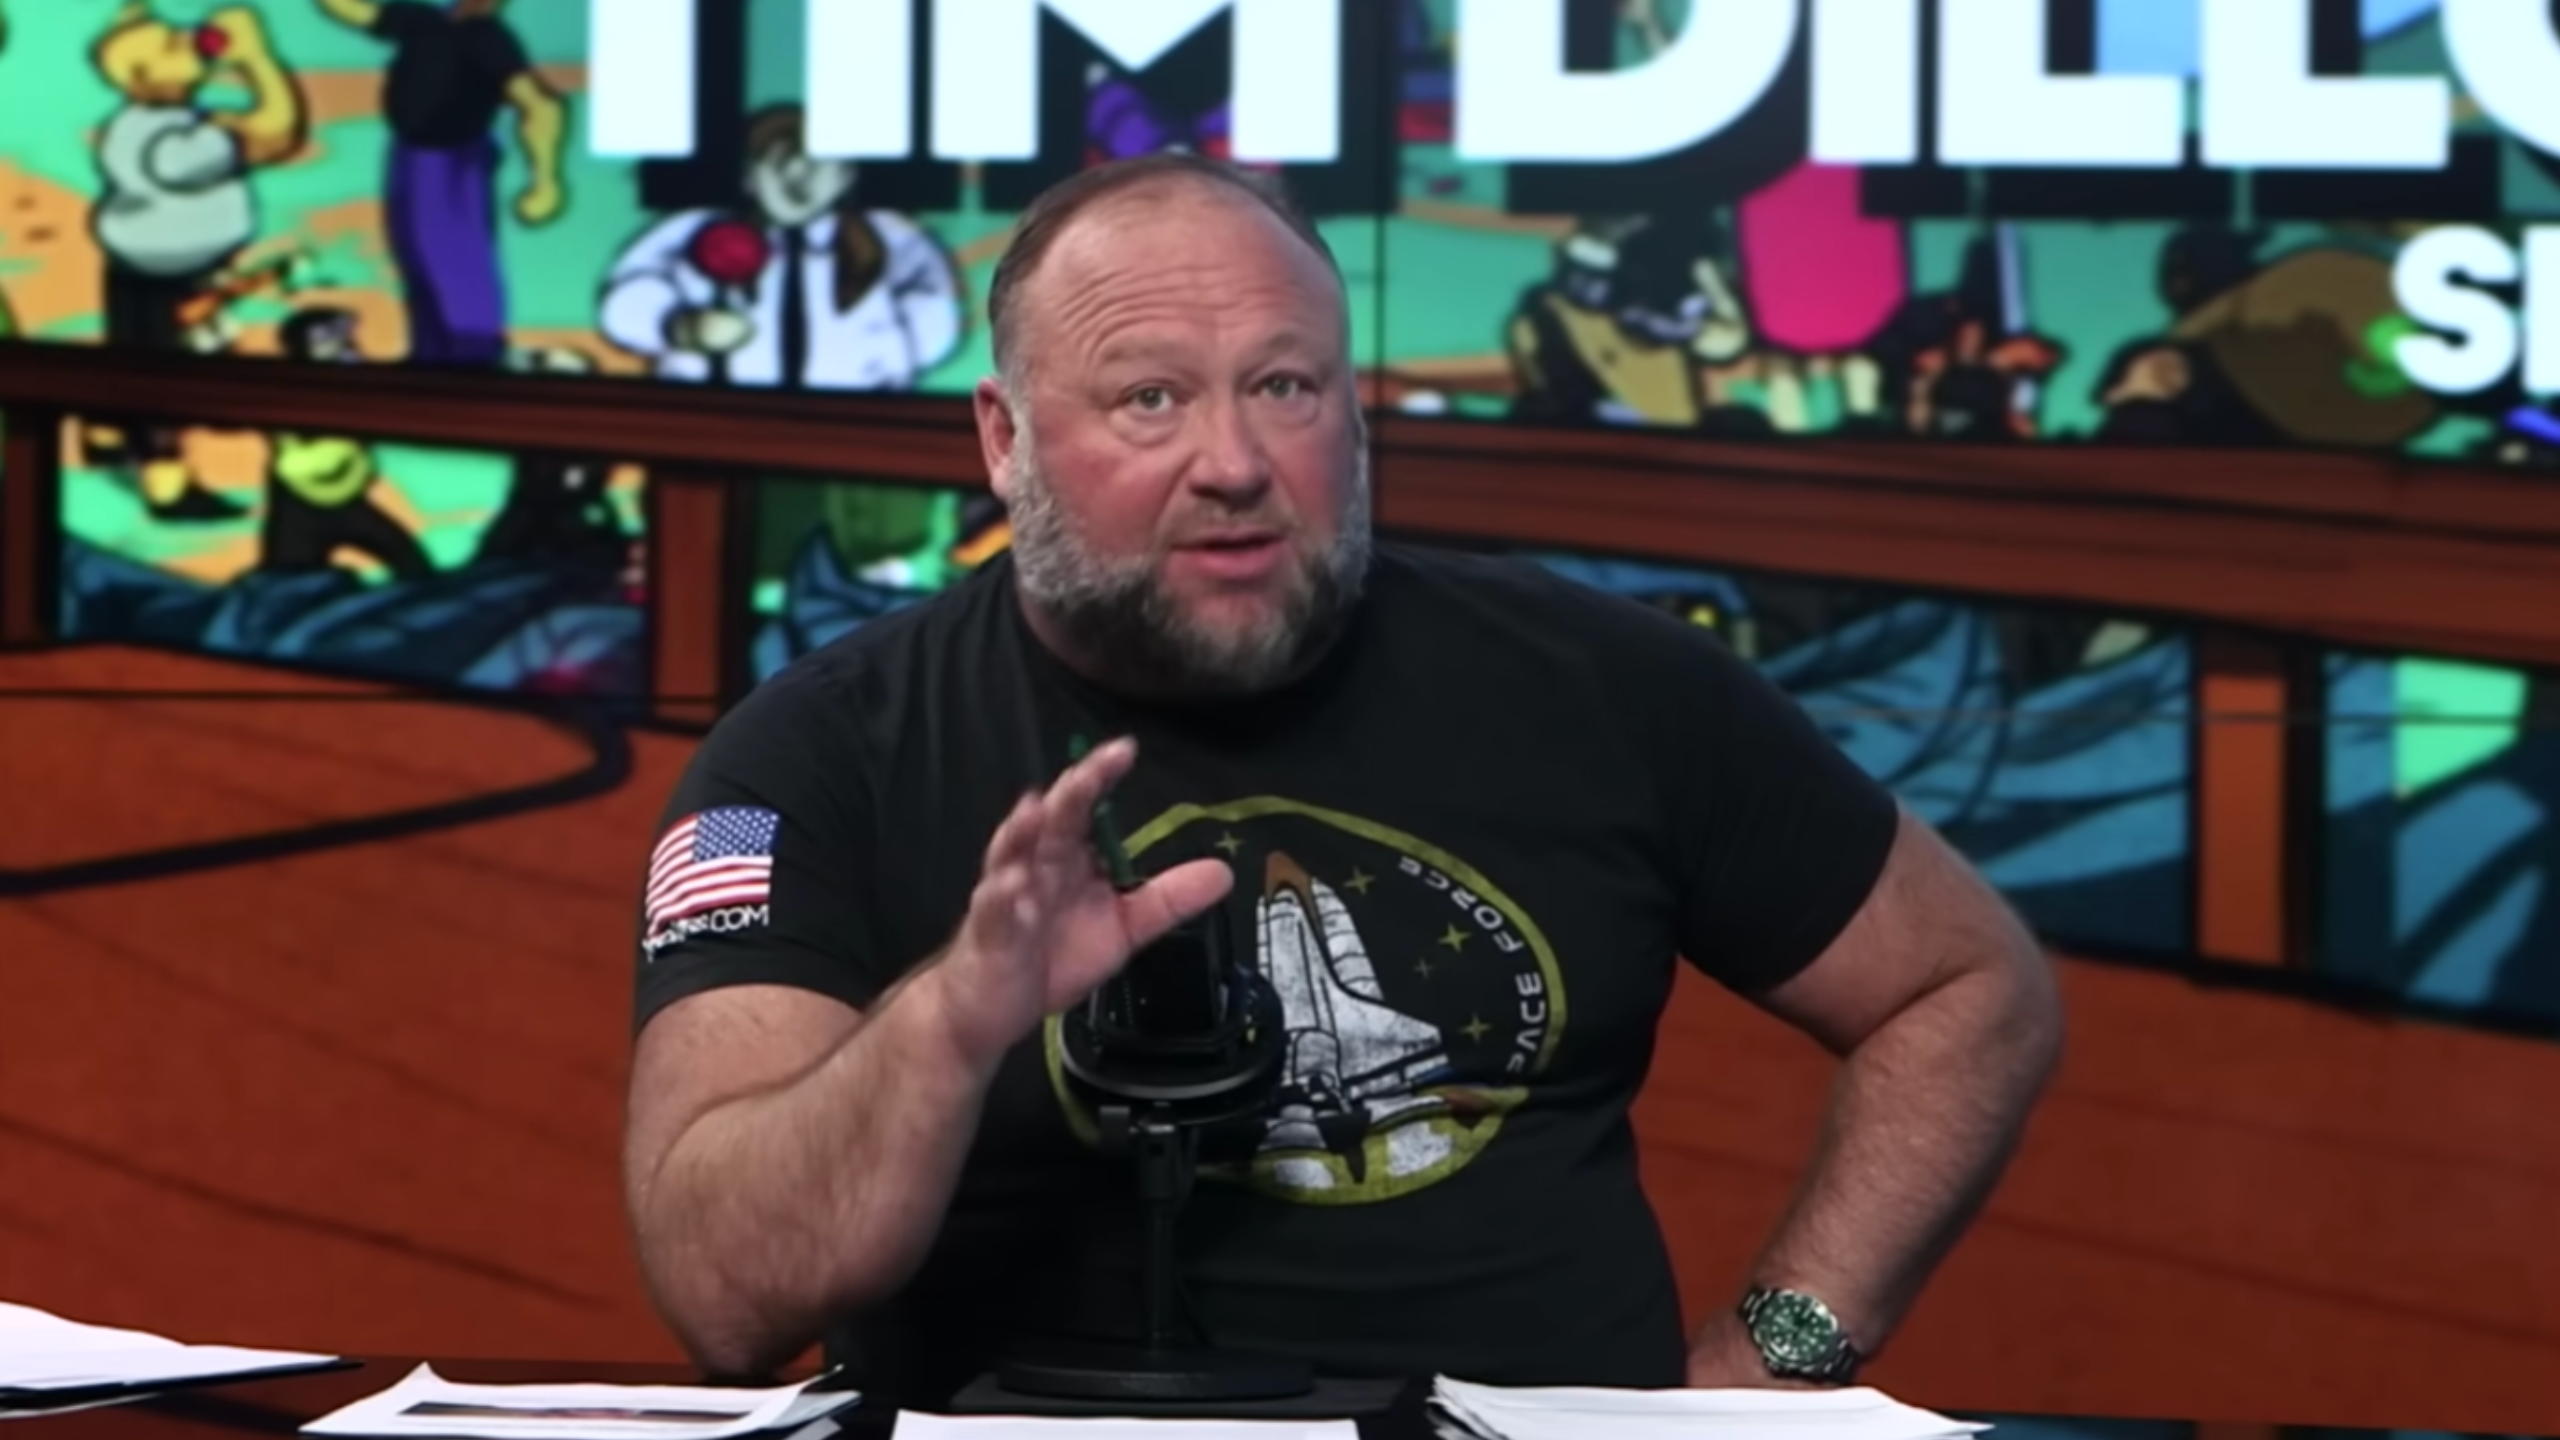 Alex Jones Describes Trump as ‘Autistic and Very Charismatic,’ Says He Called His Wife to Insist She’s ‘Got a Real Man’